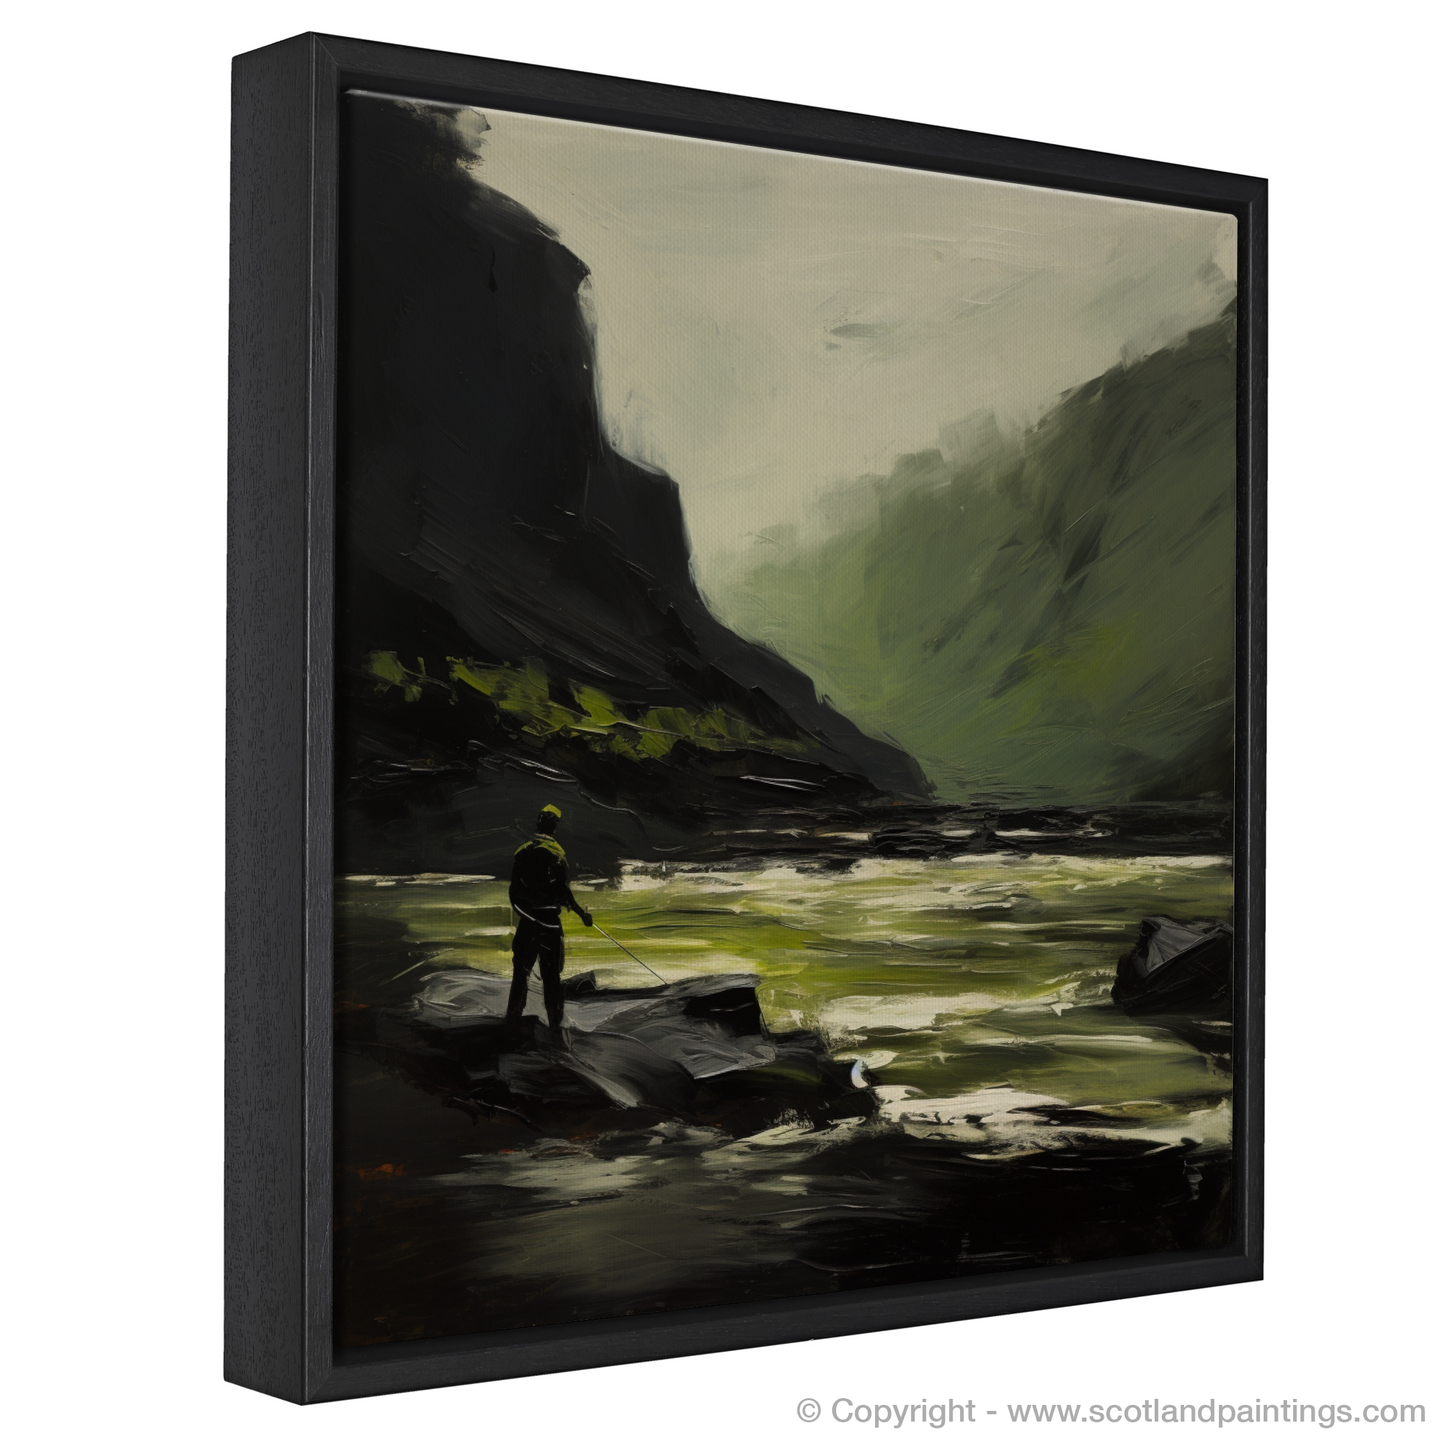 Painting and Art Print of A man fishing on a Scottish River entitled "Solitary Angler on the Wild Scottish River".